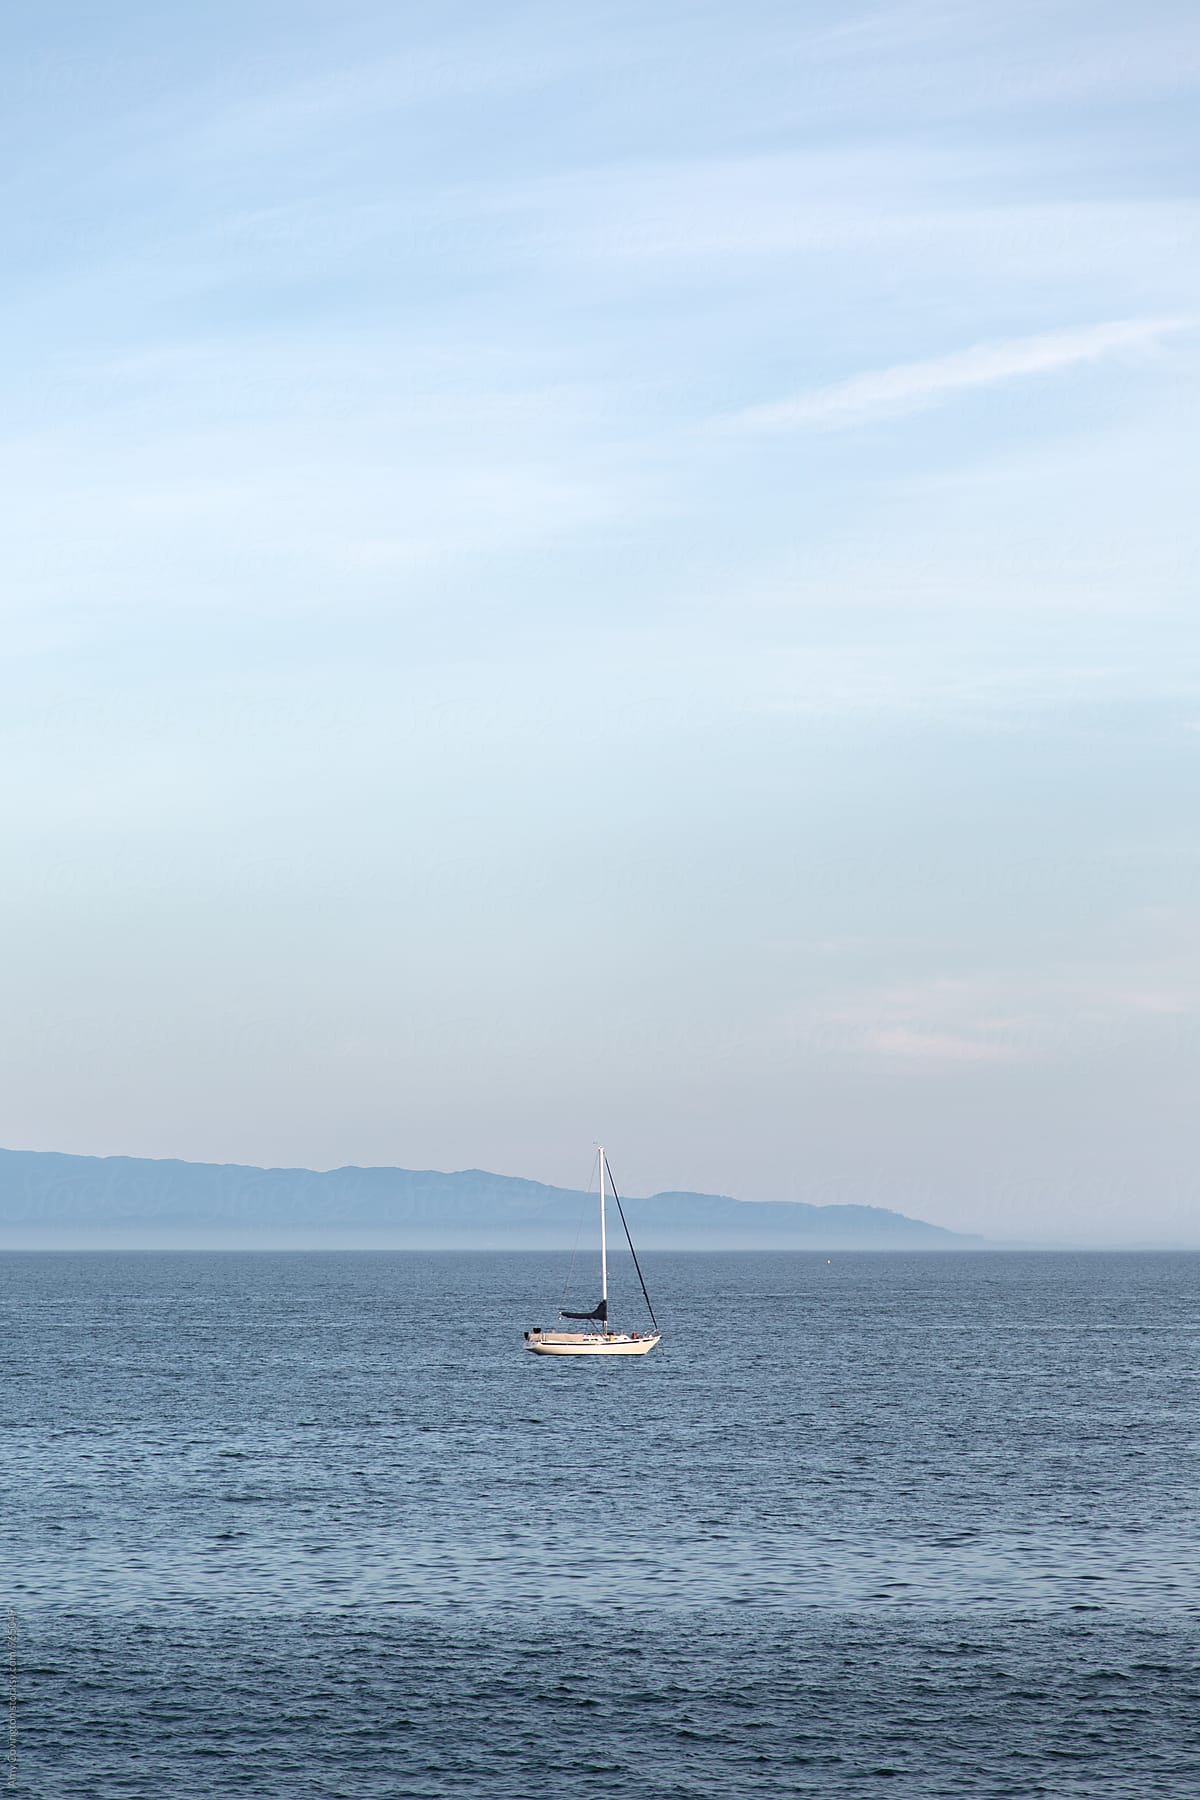 Sail boat floating in the ocean